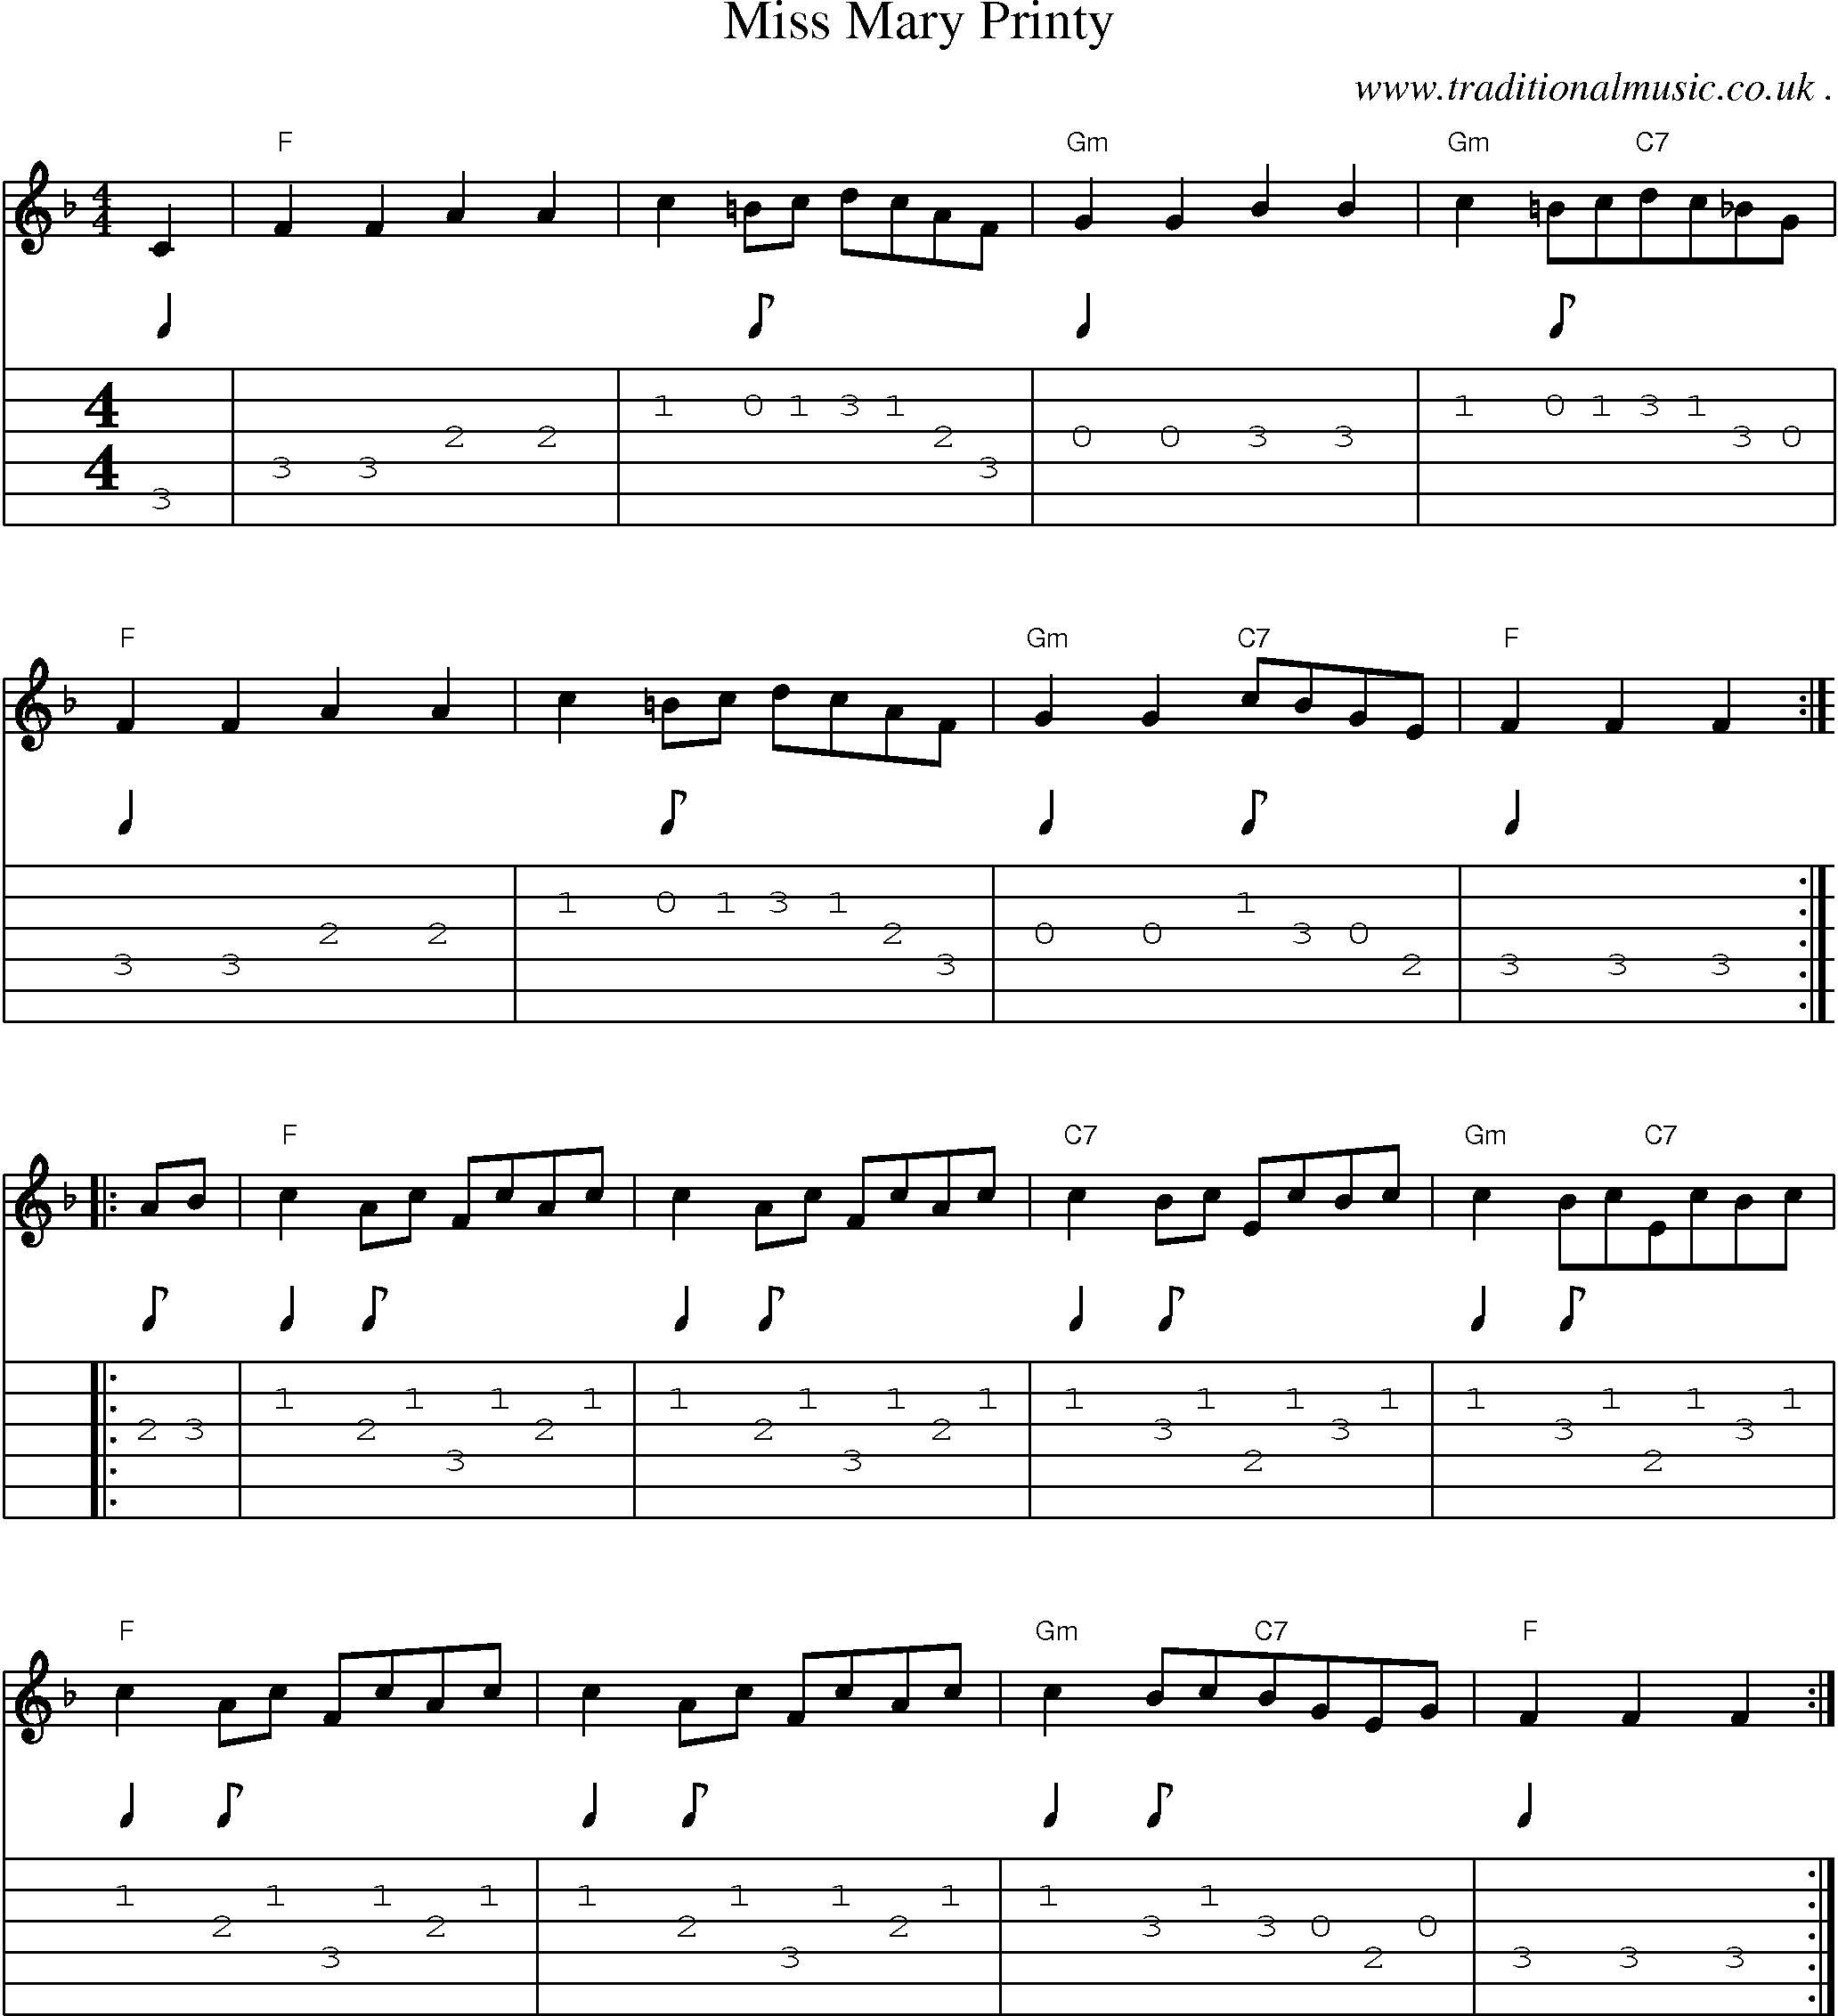 Sheet-Music and Guitar Tabs for Miss Mary Printy